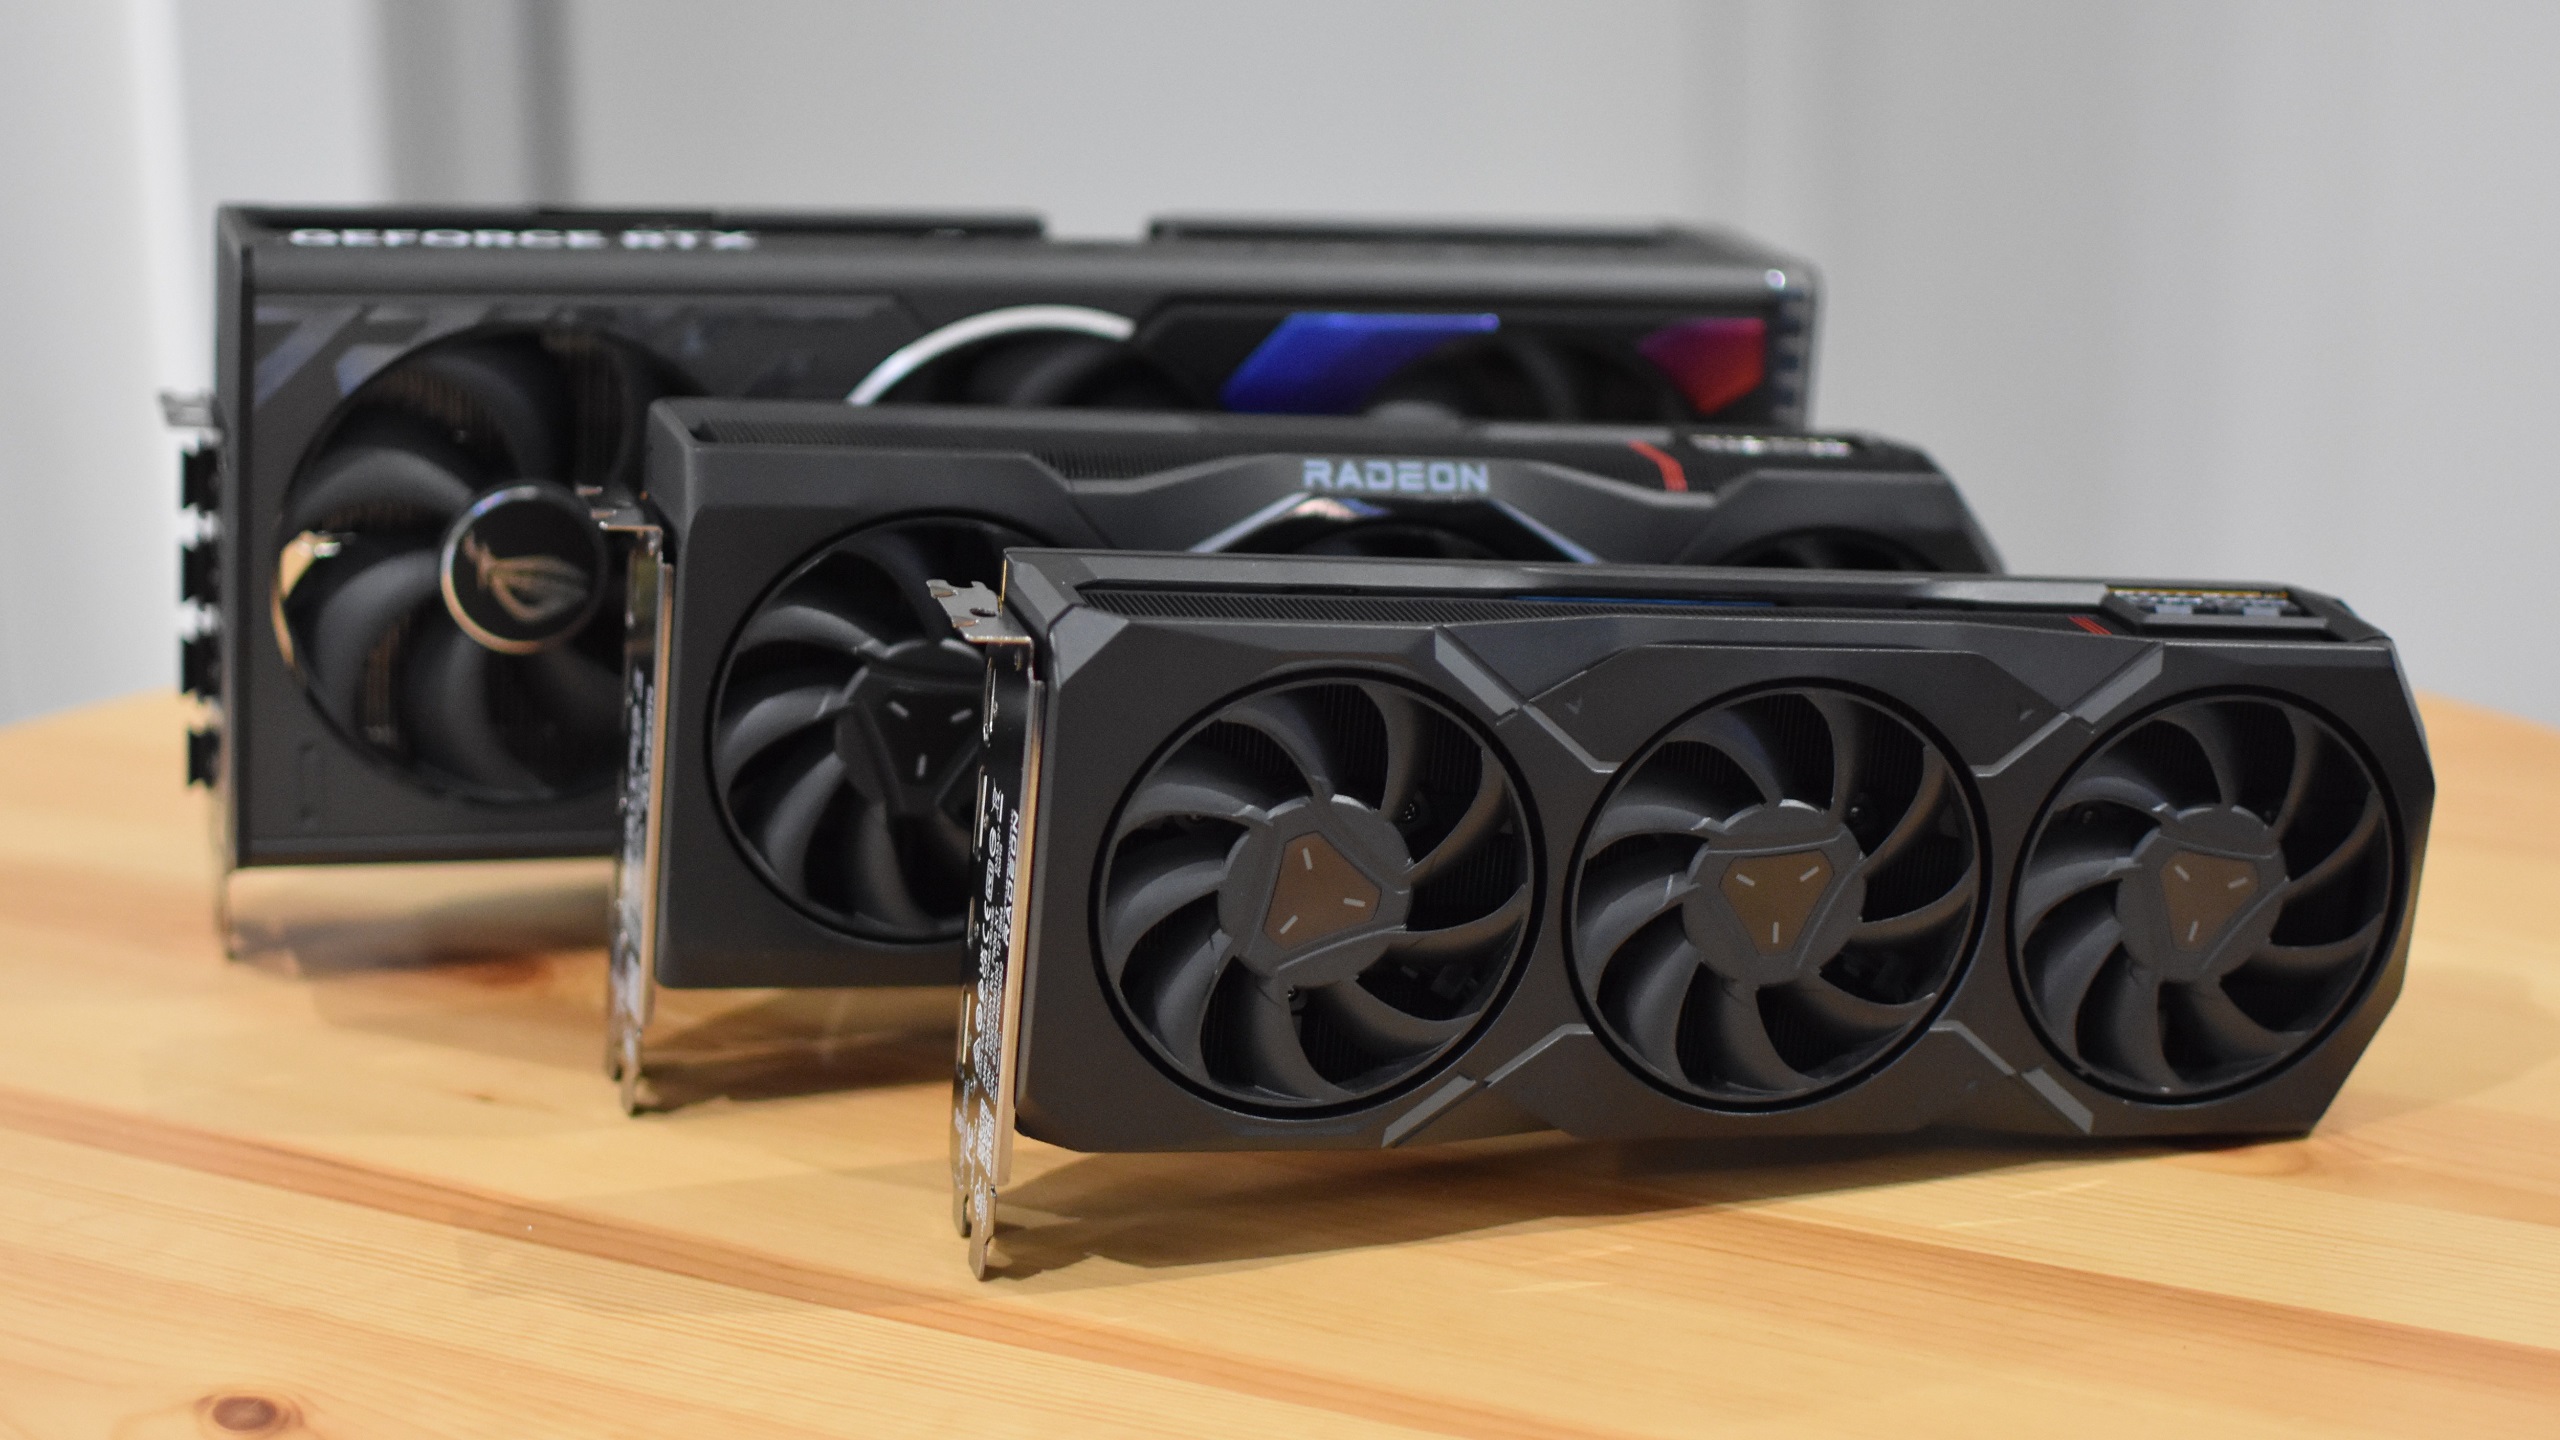 The AMD Radeon RX 7900 XT and Radeon RX 7900 XTX graphics cards laid out in front of a much larger RTX 4080.